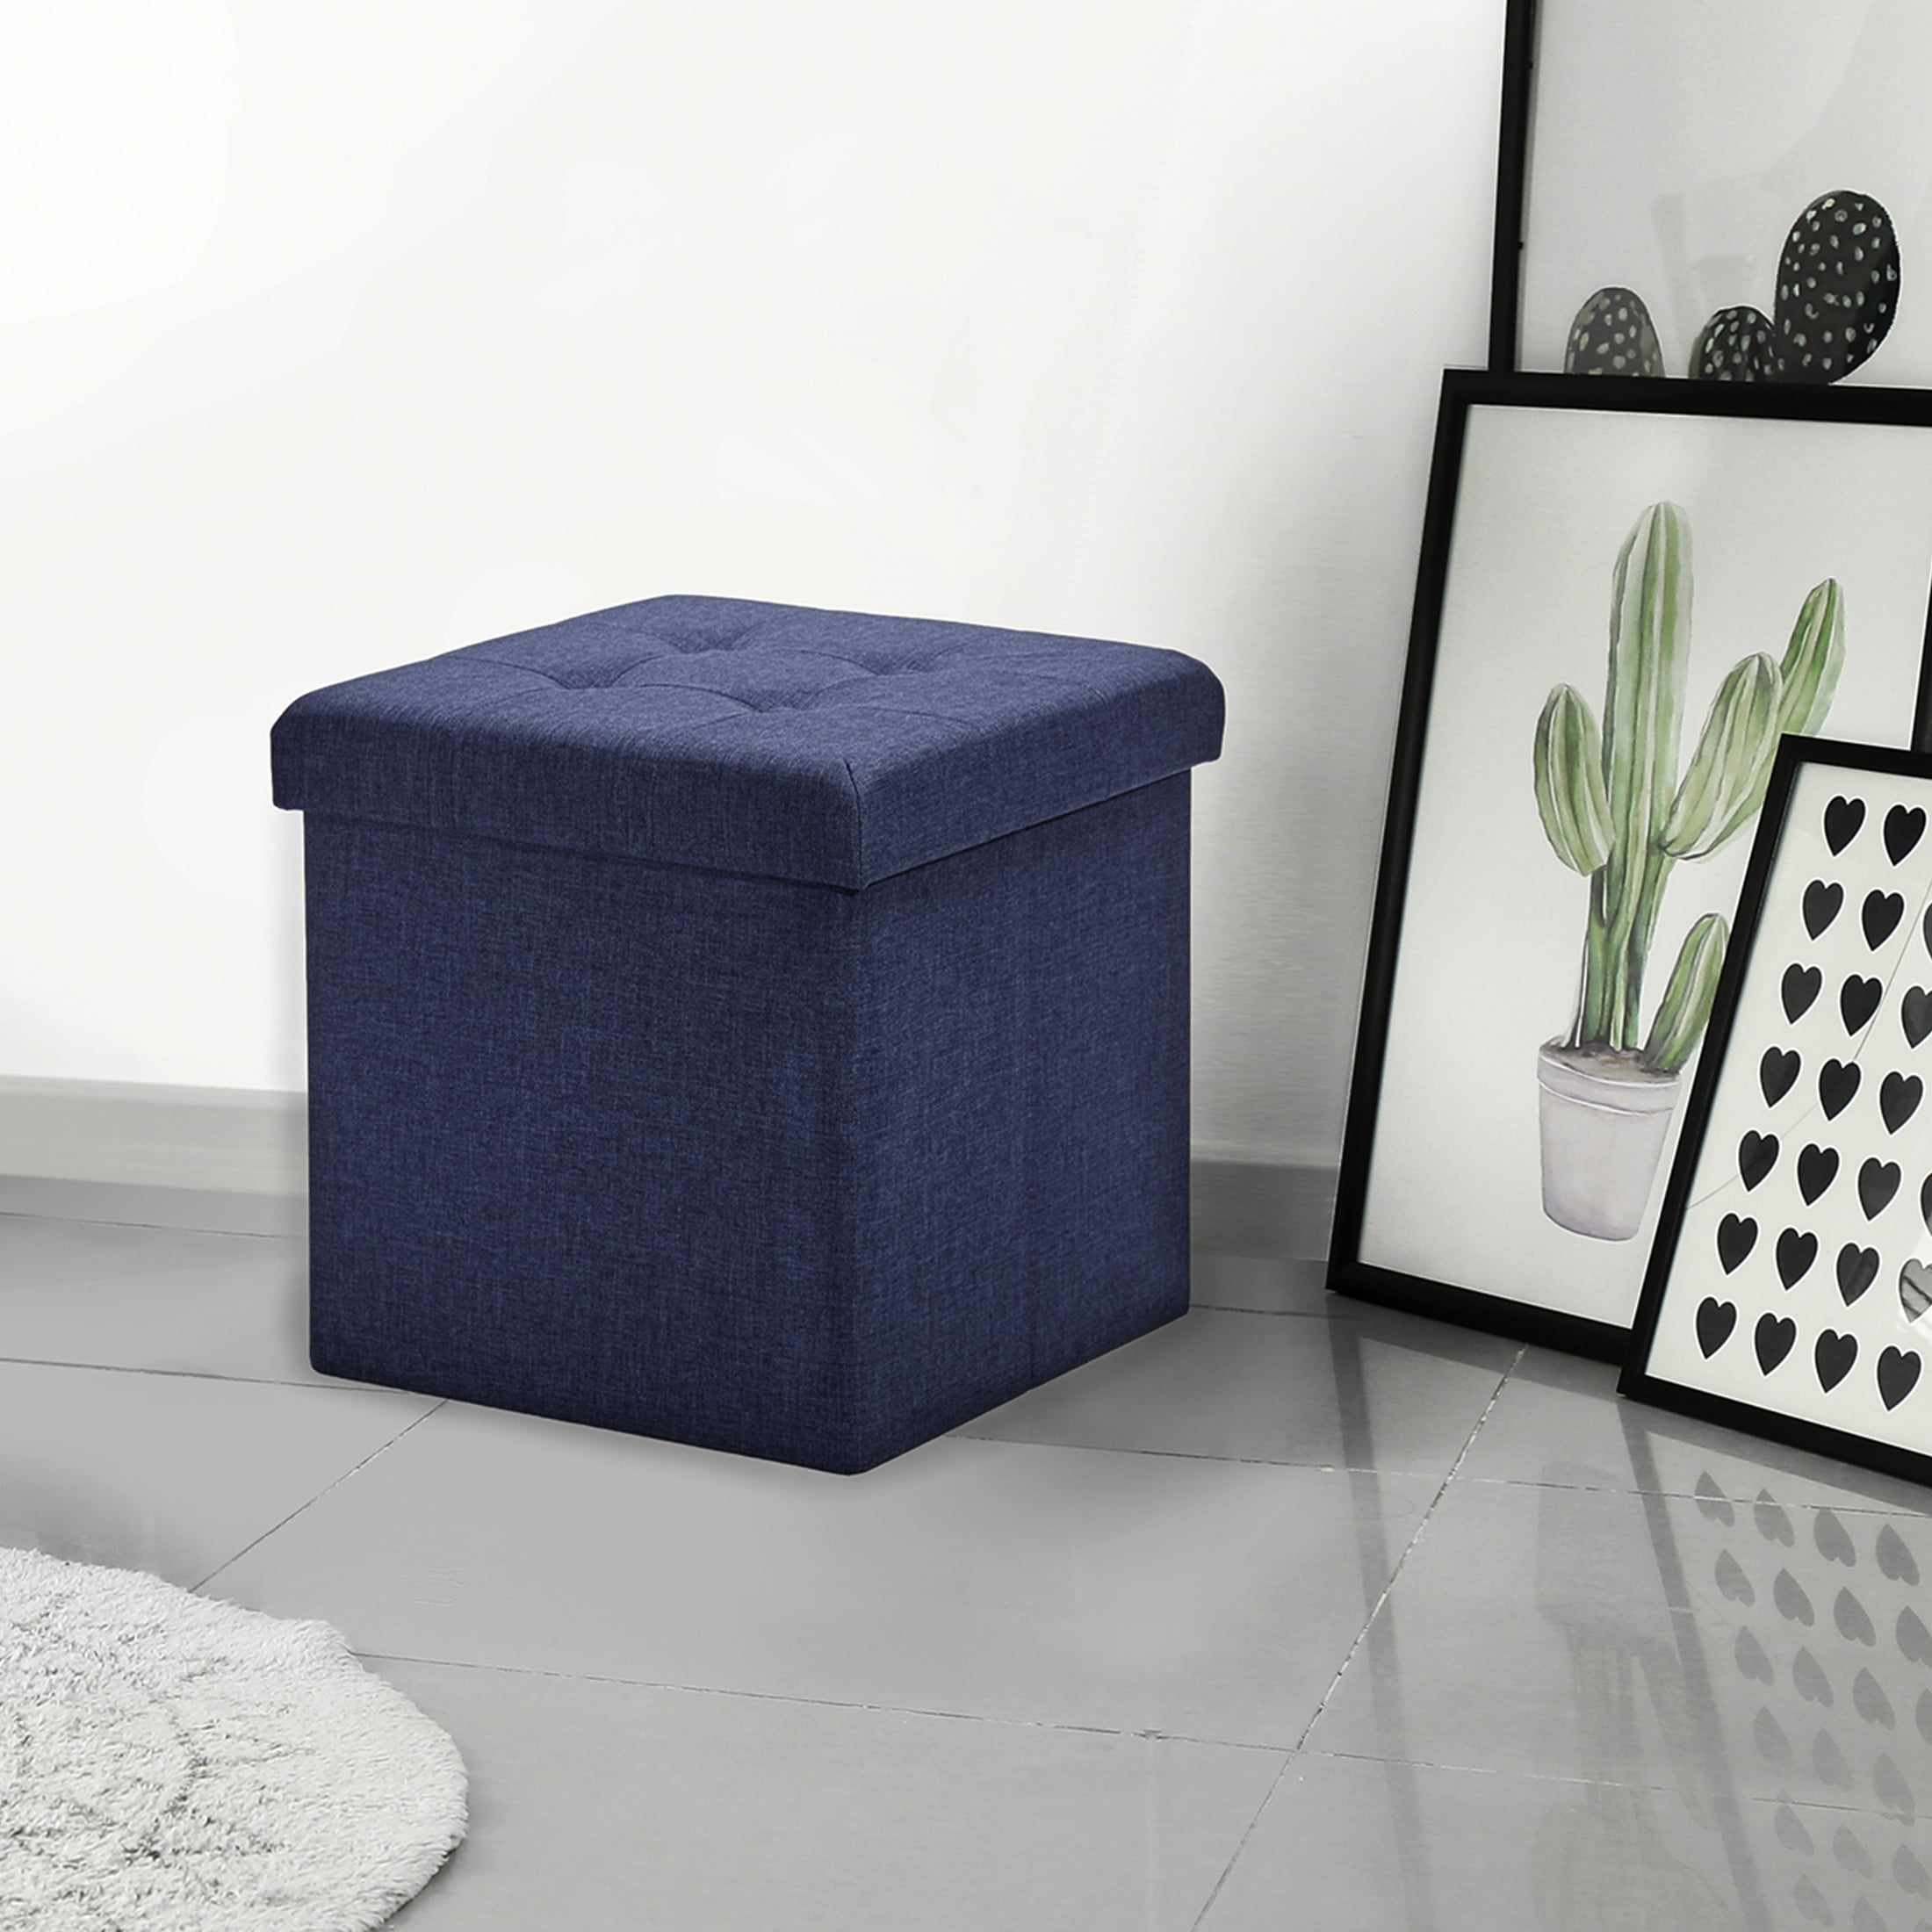 Dropship [Video] Round Ottoman Set With Storage, 2 In 1